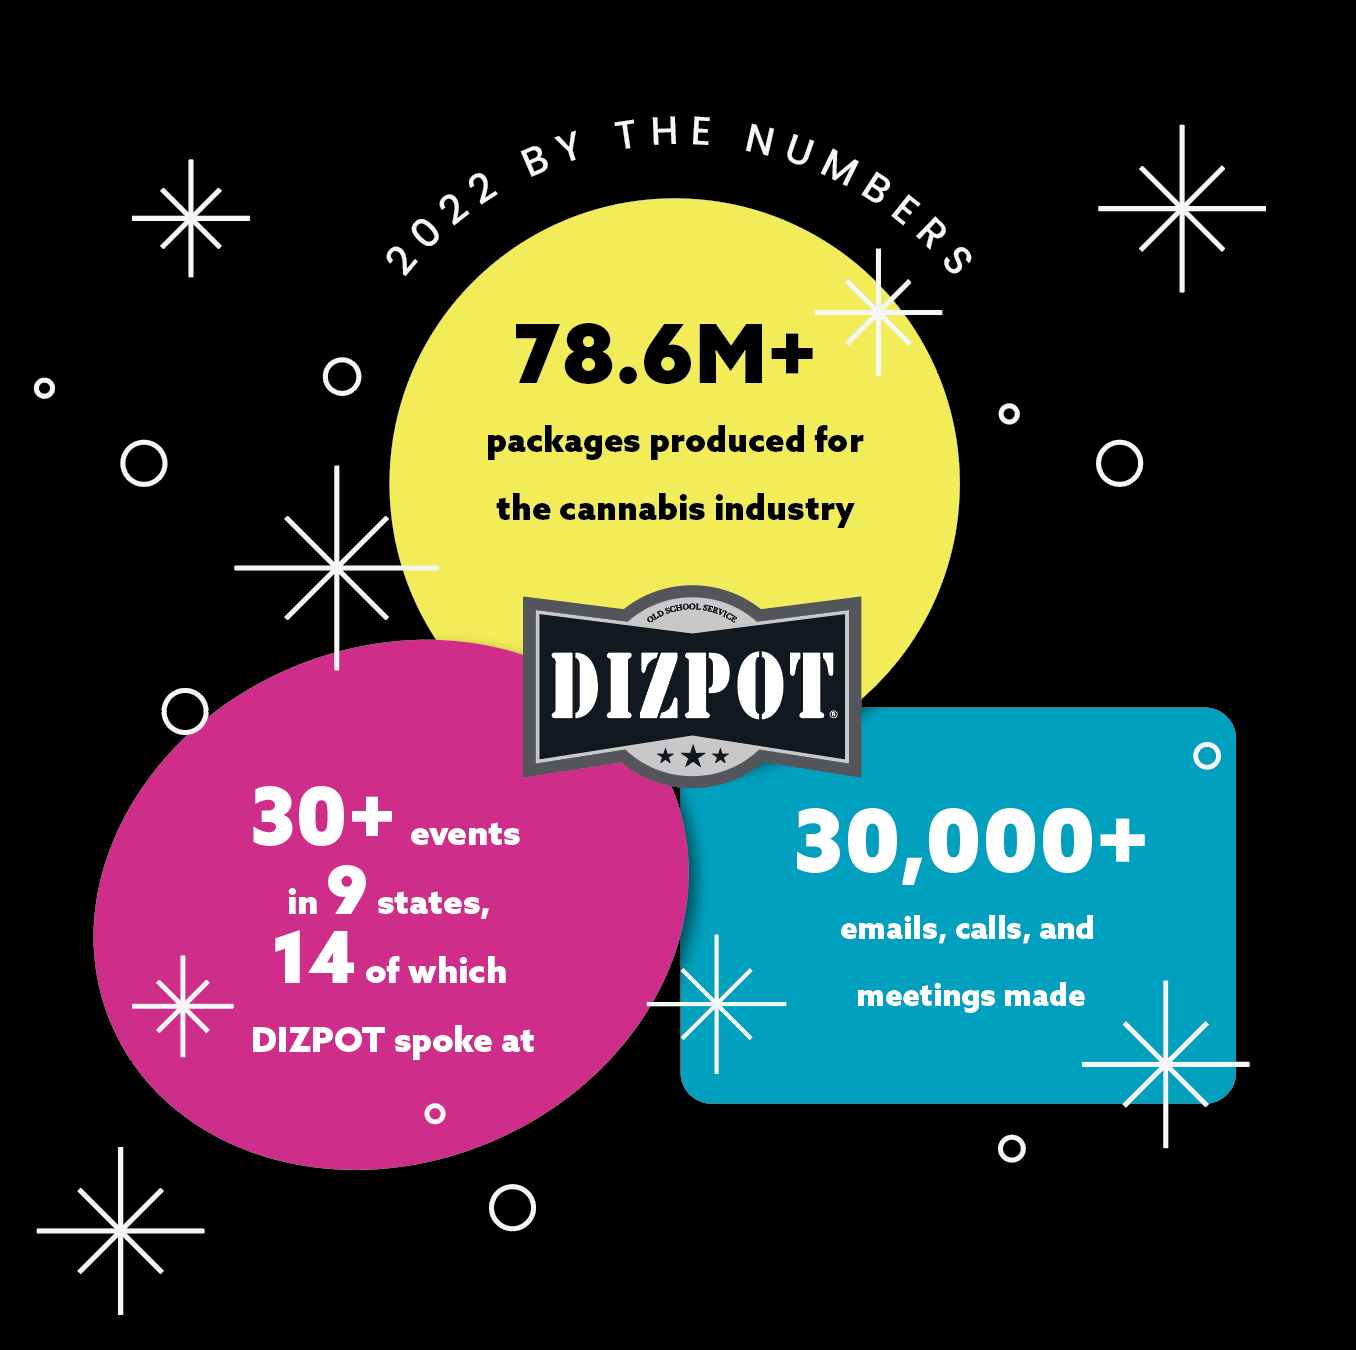 DIZPOT by the numbers 2022